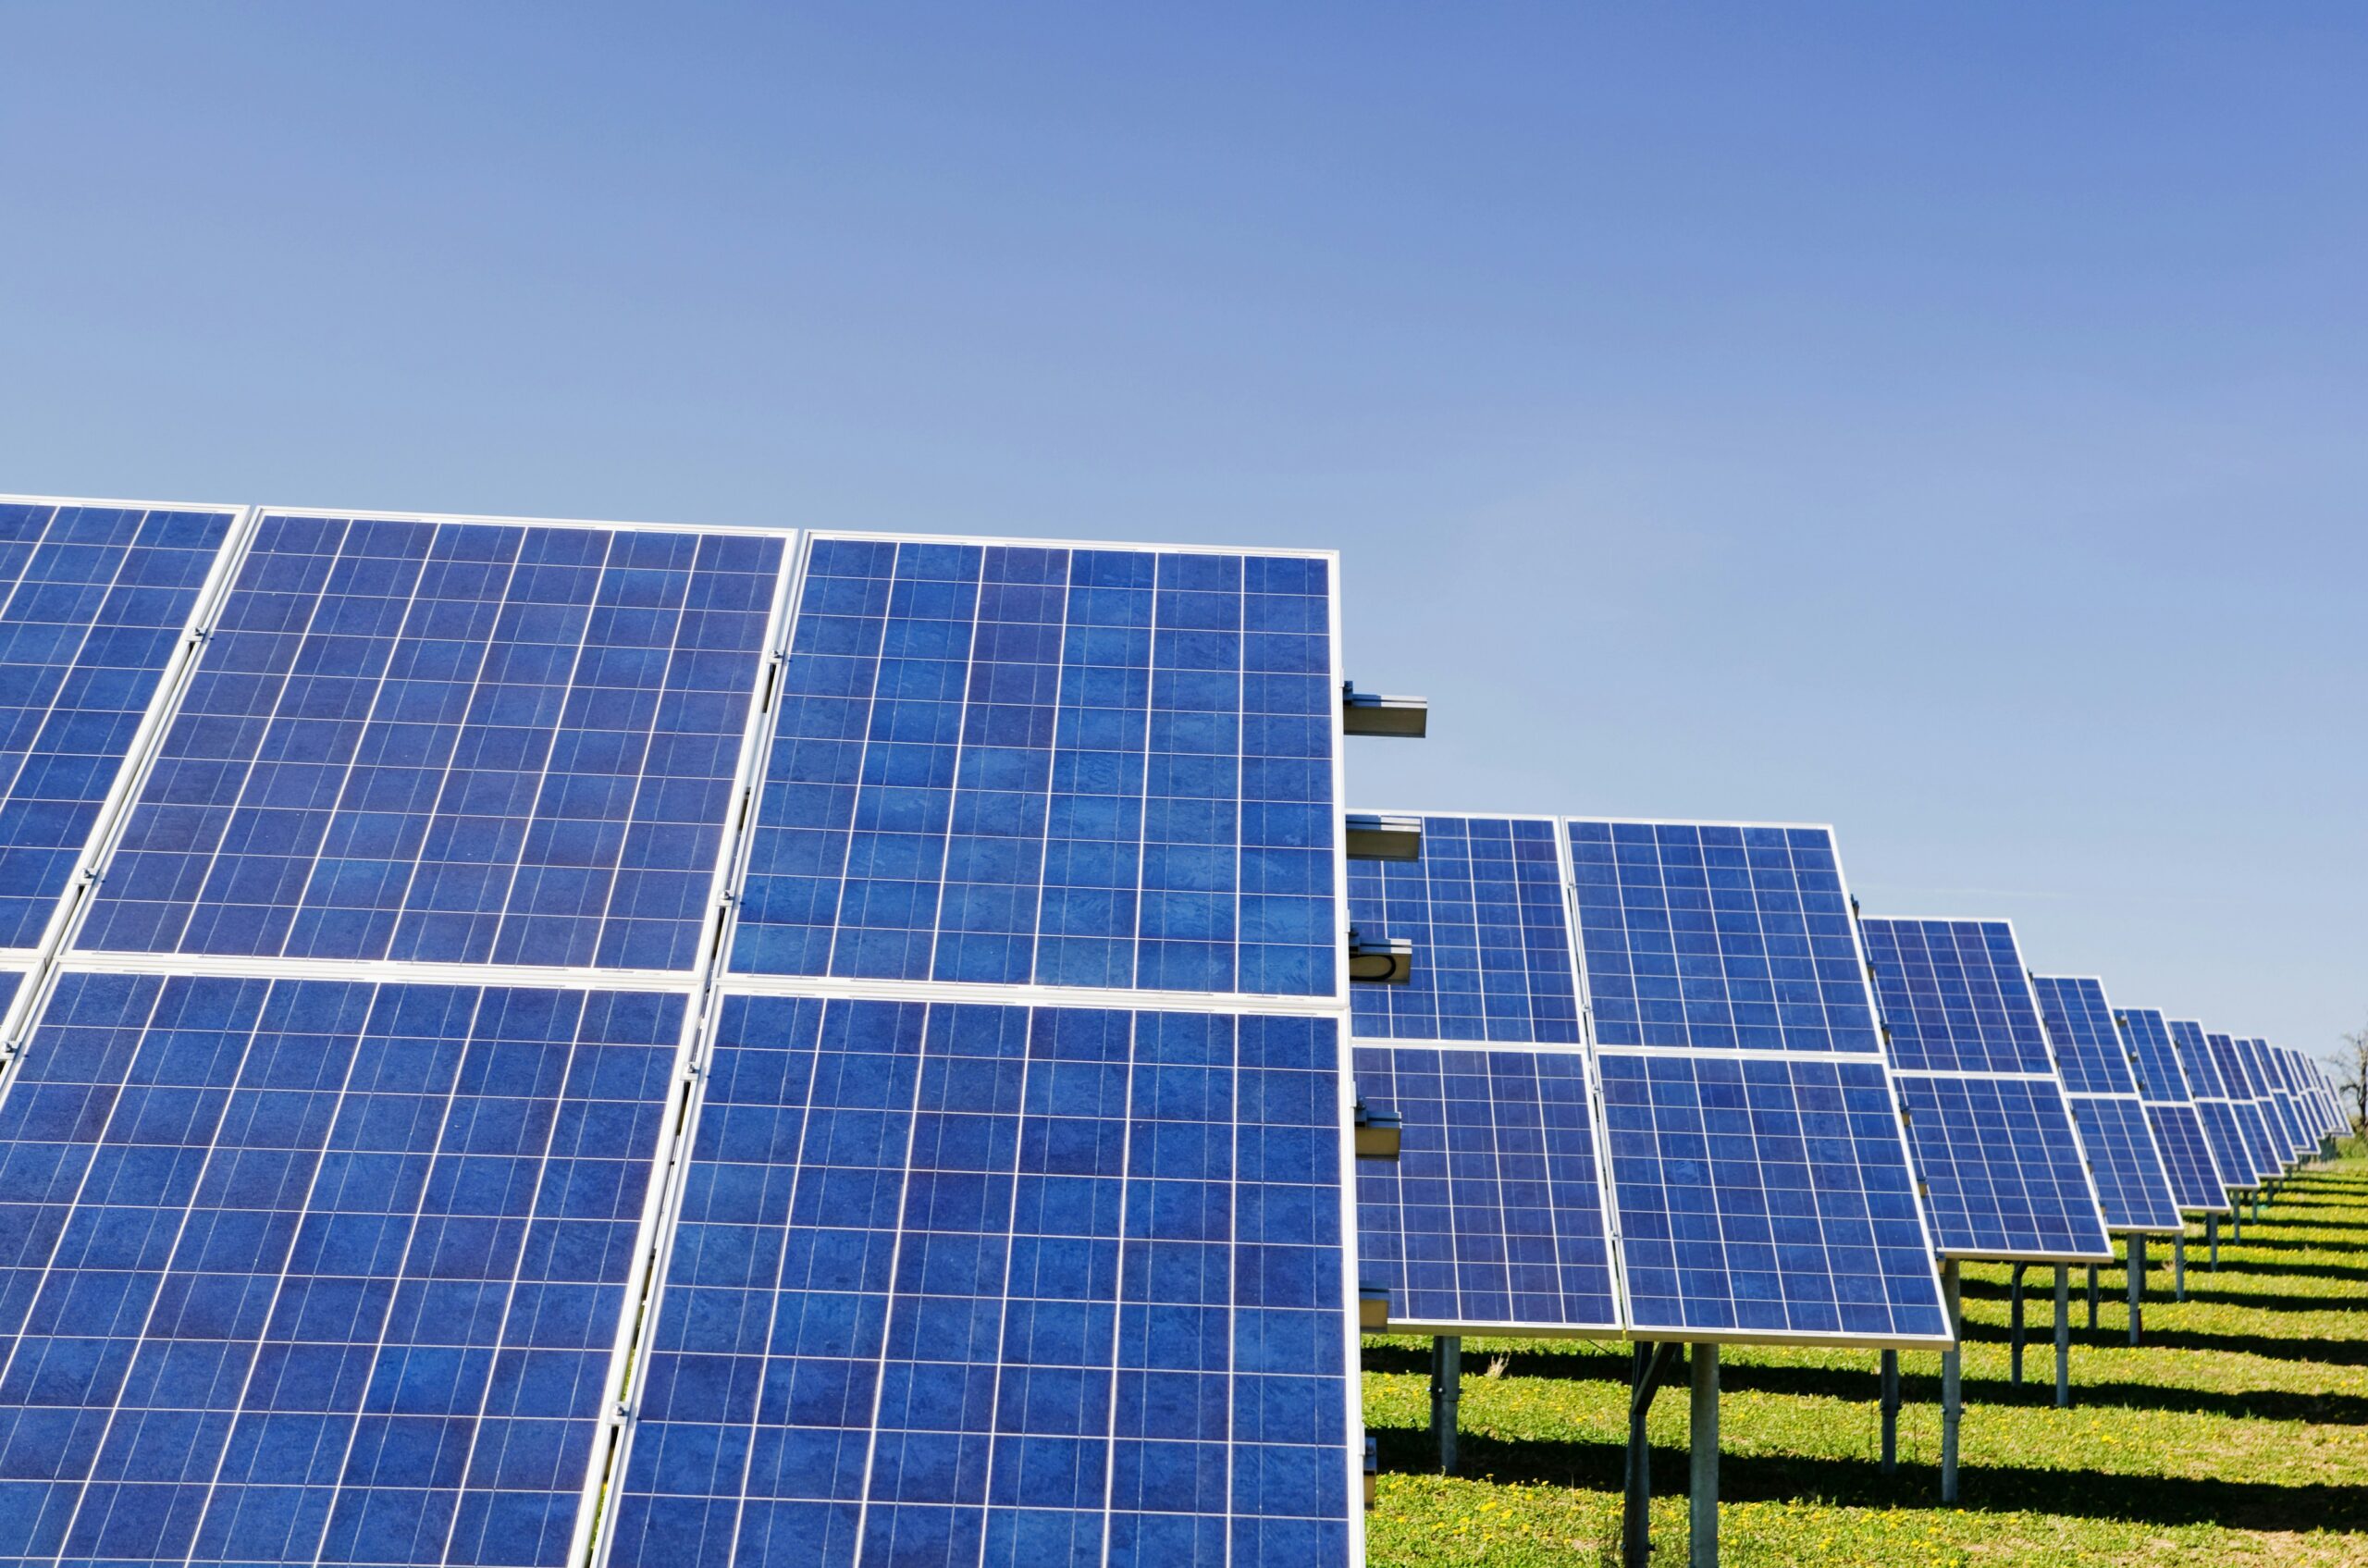 What Are The Benefits Of Using Solar Energy?